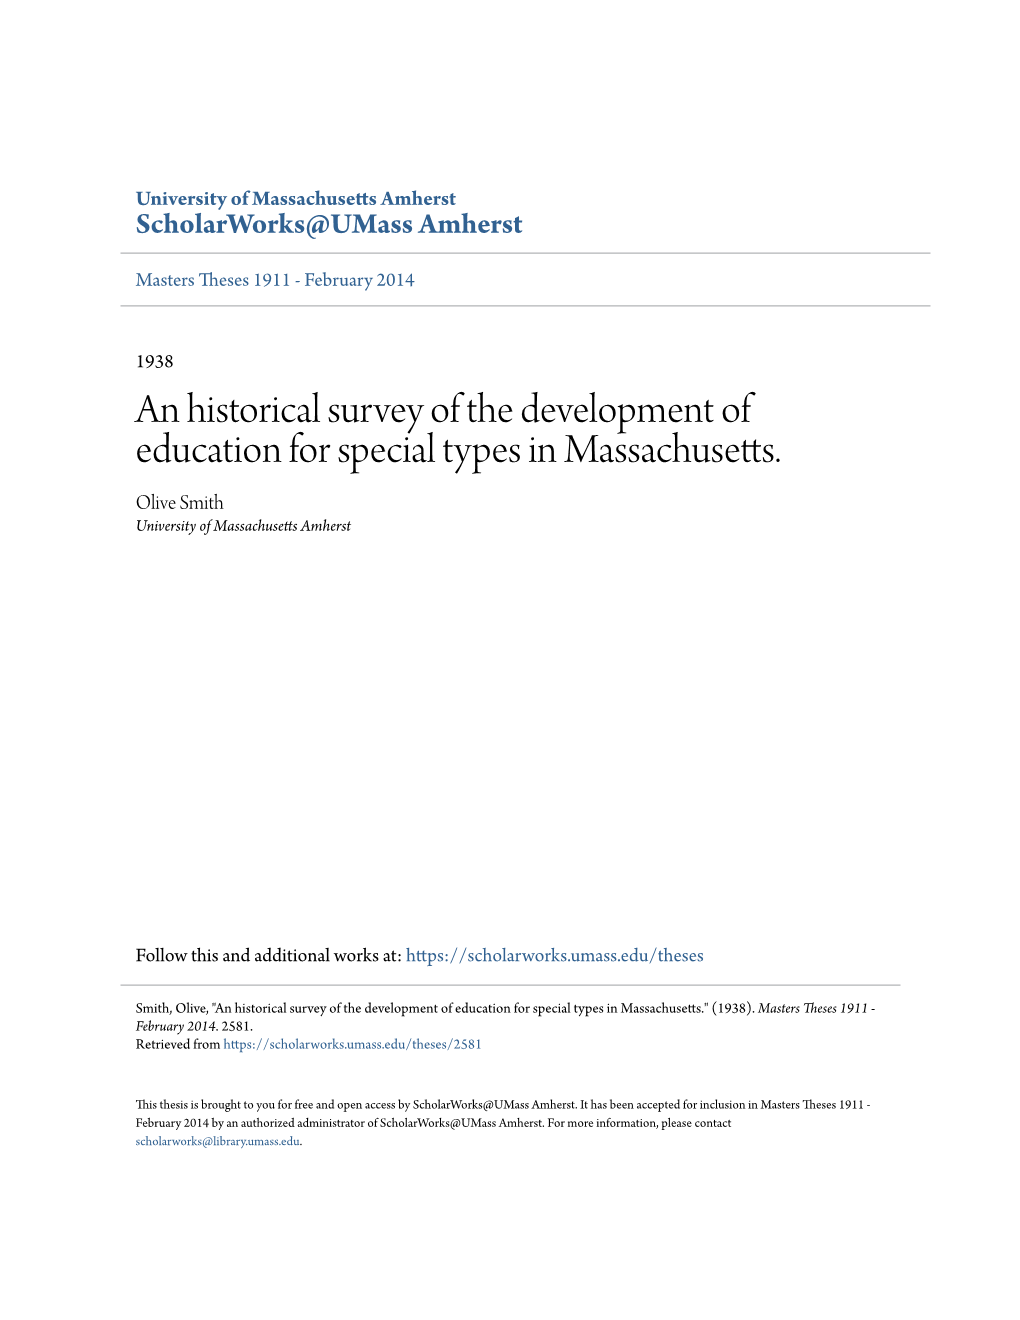 An Historical Survey of the Development of Education for Special Types in Massachusetts